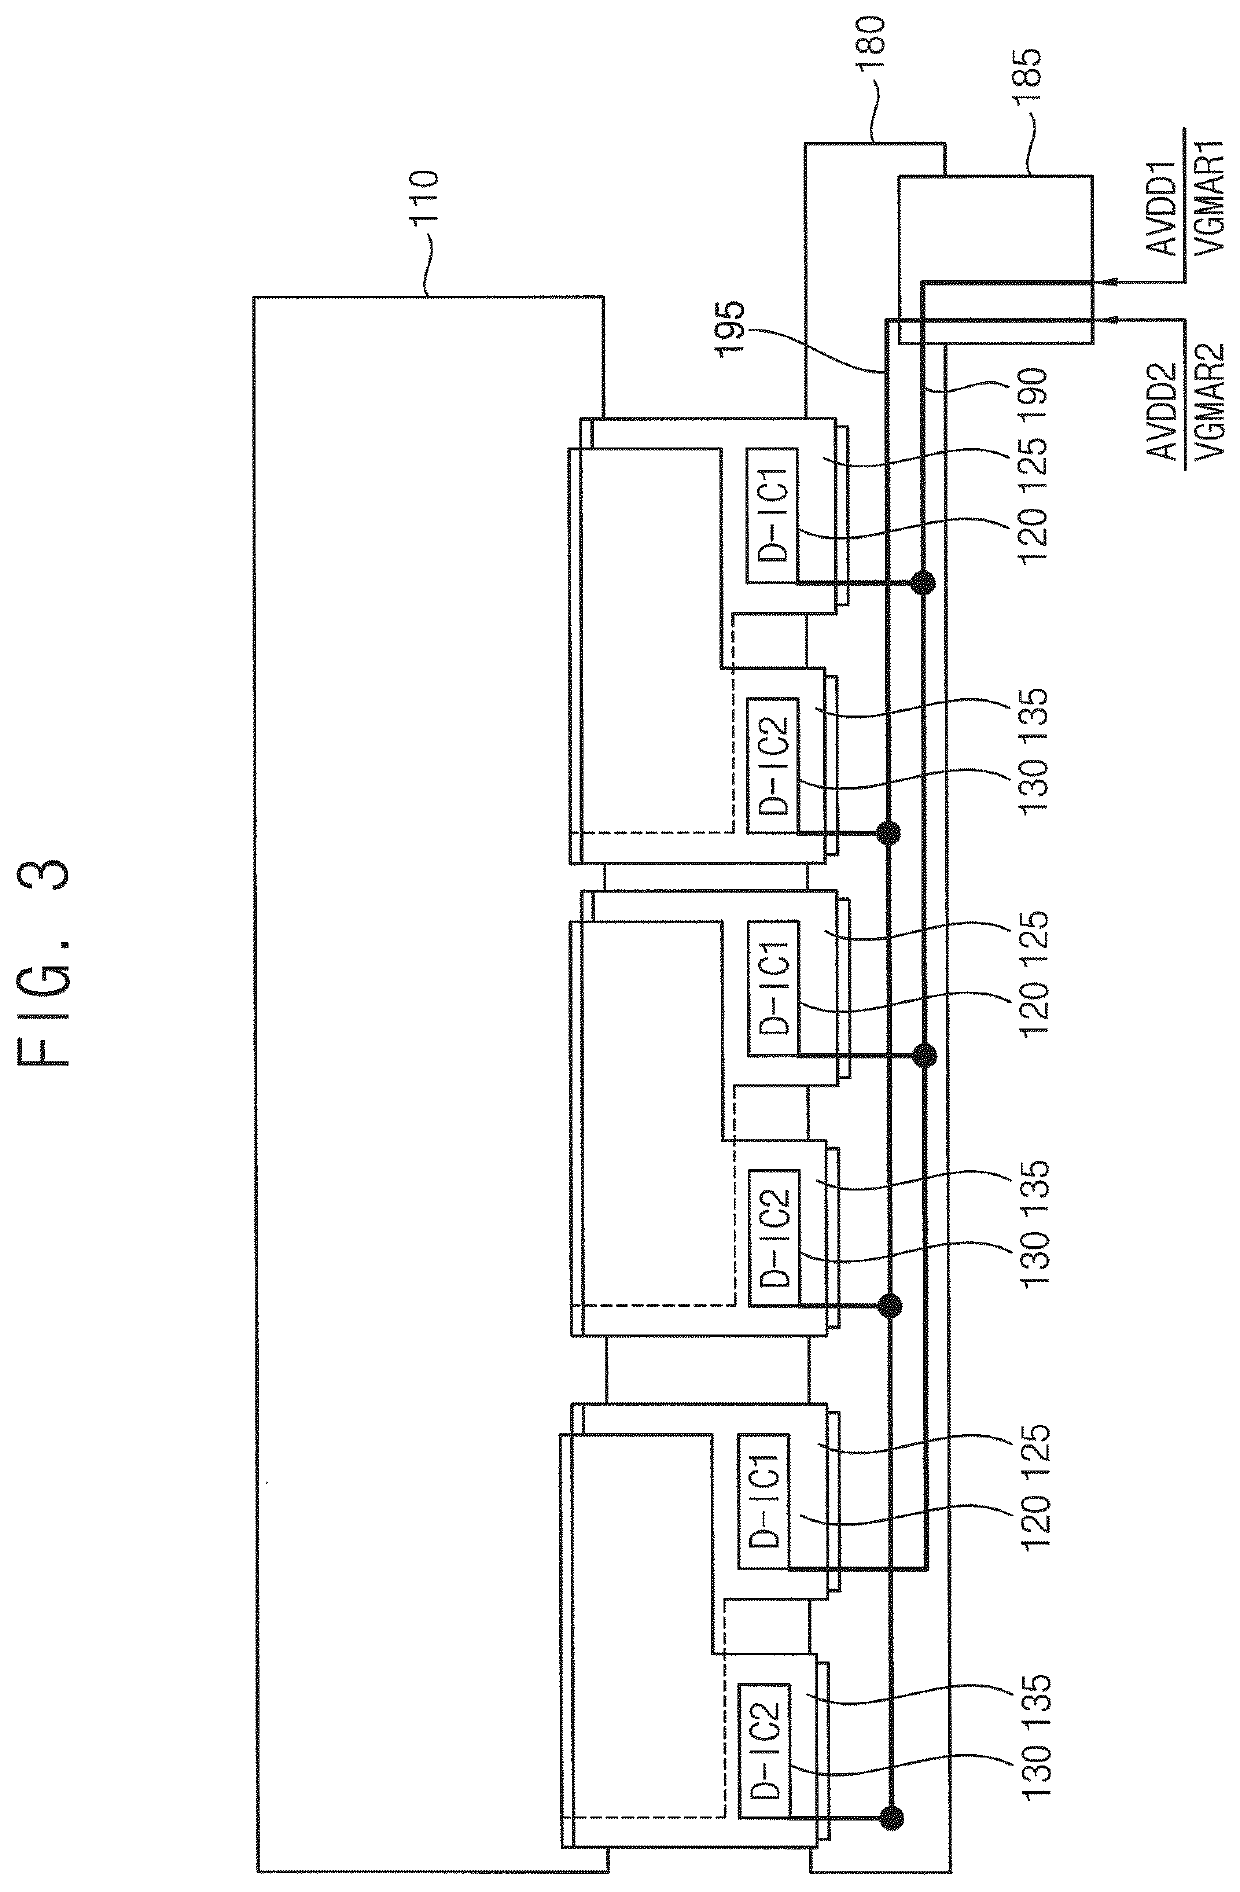 Display device including data drivers